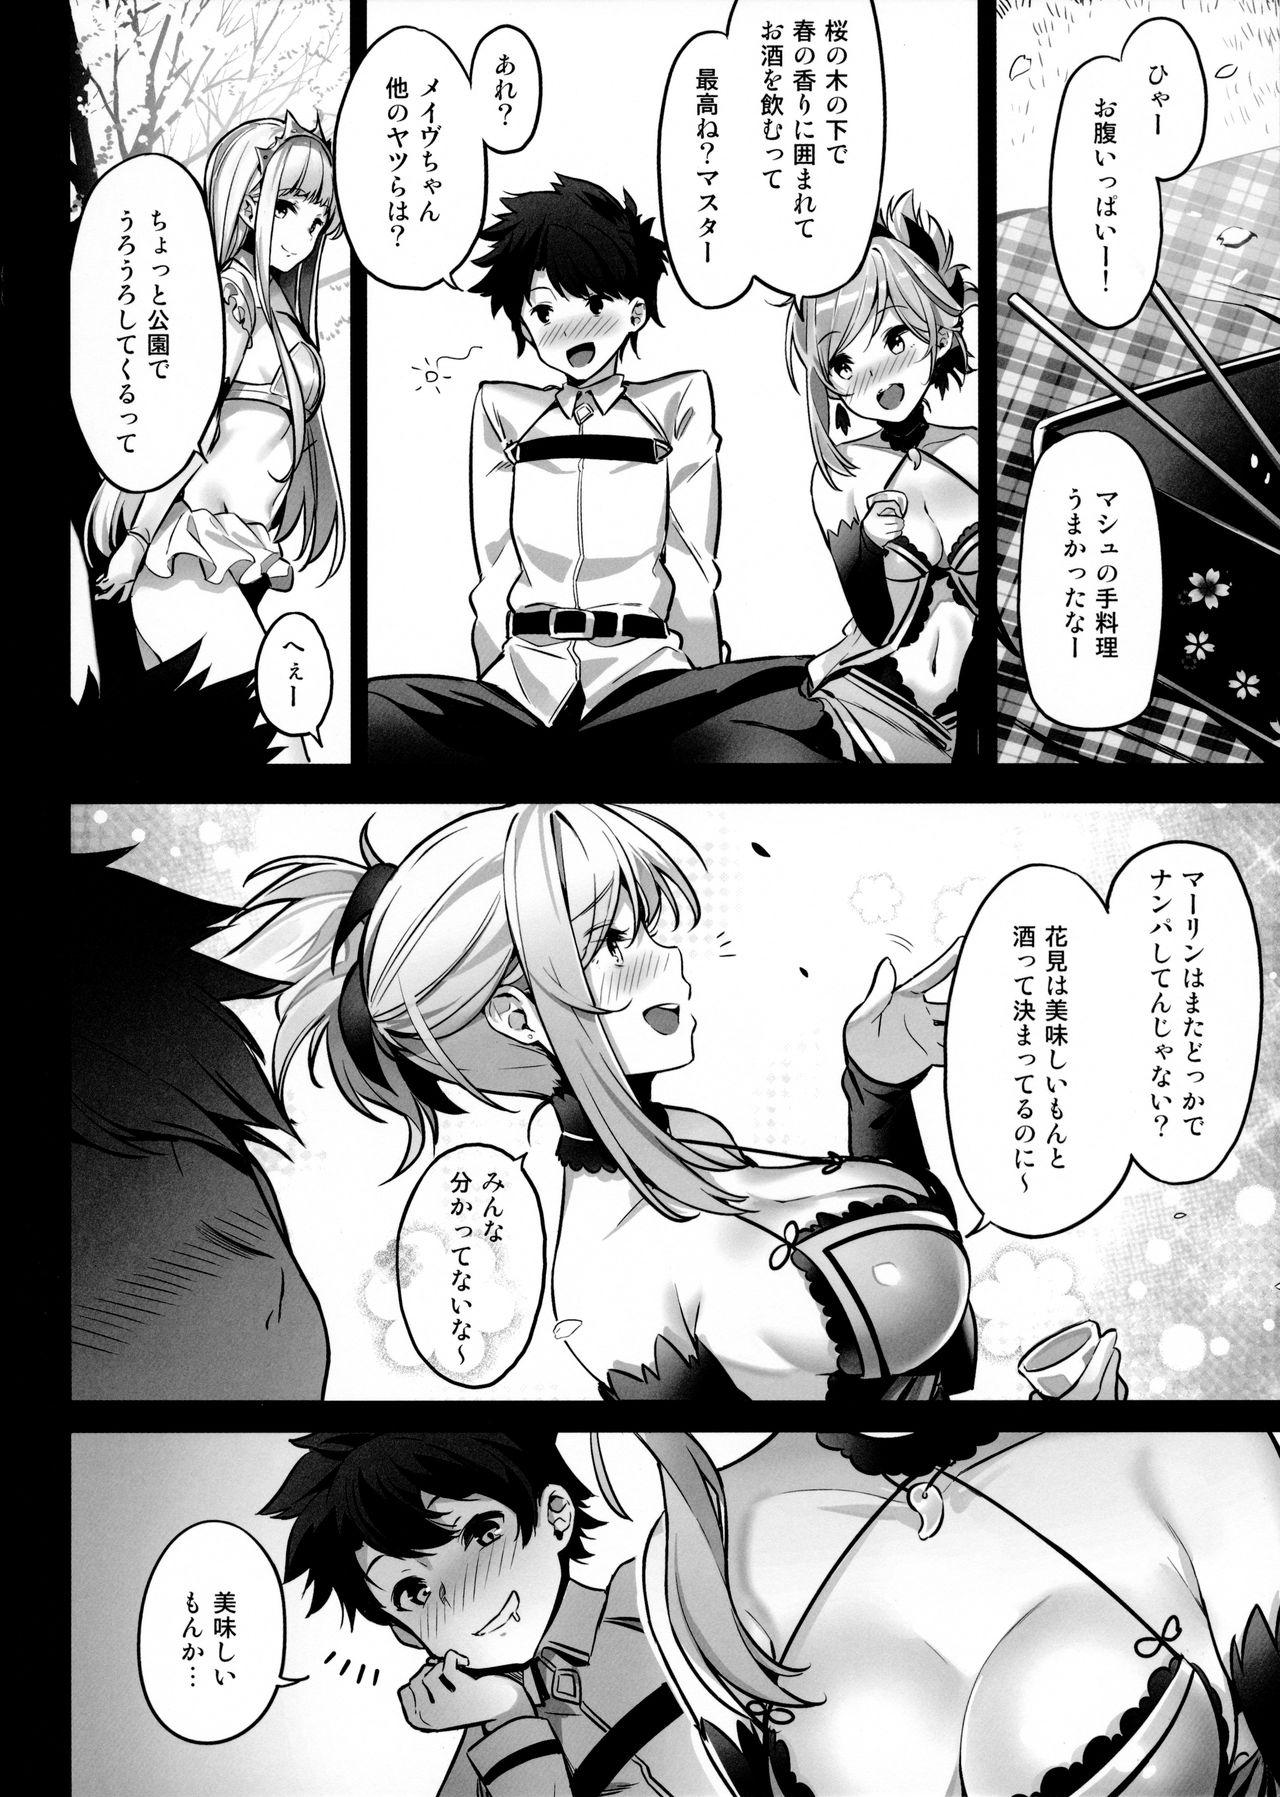 Cameltoe moon phase material - Fate grand order 18yearsold - Page 5